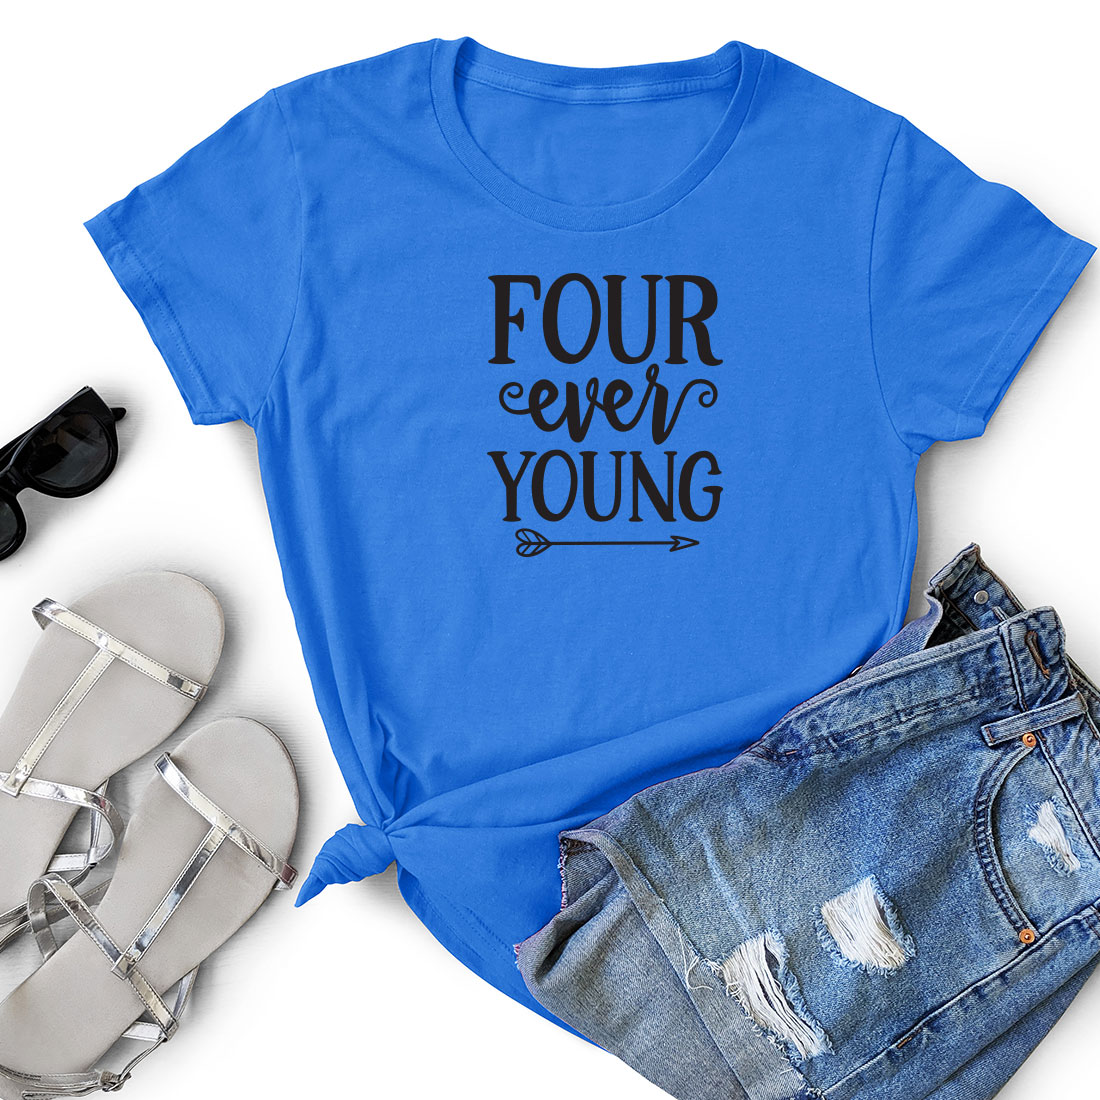 T - shirt that says four ever young next to a pair of shorts.